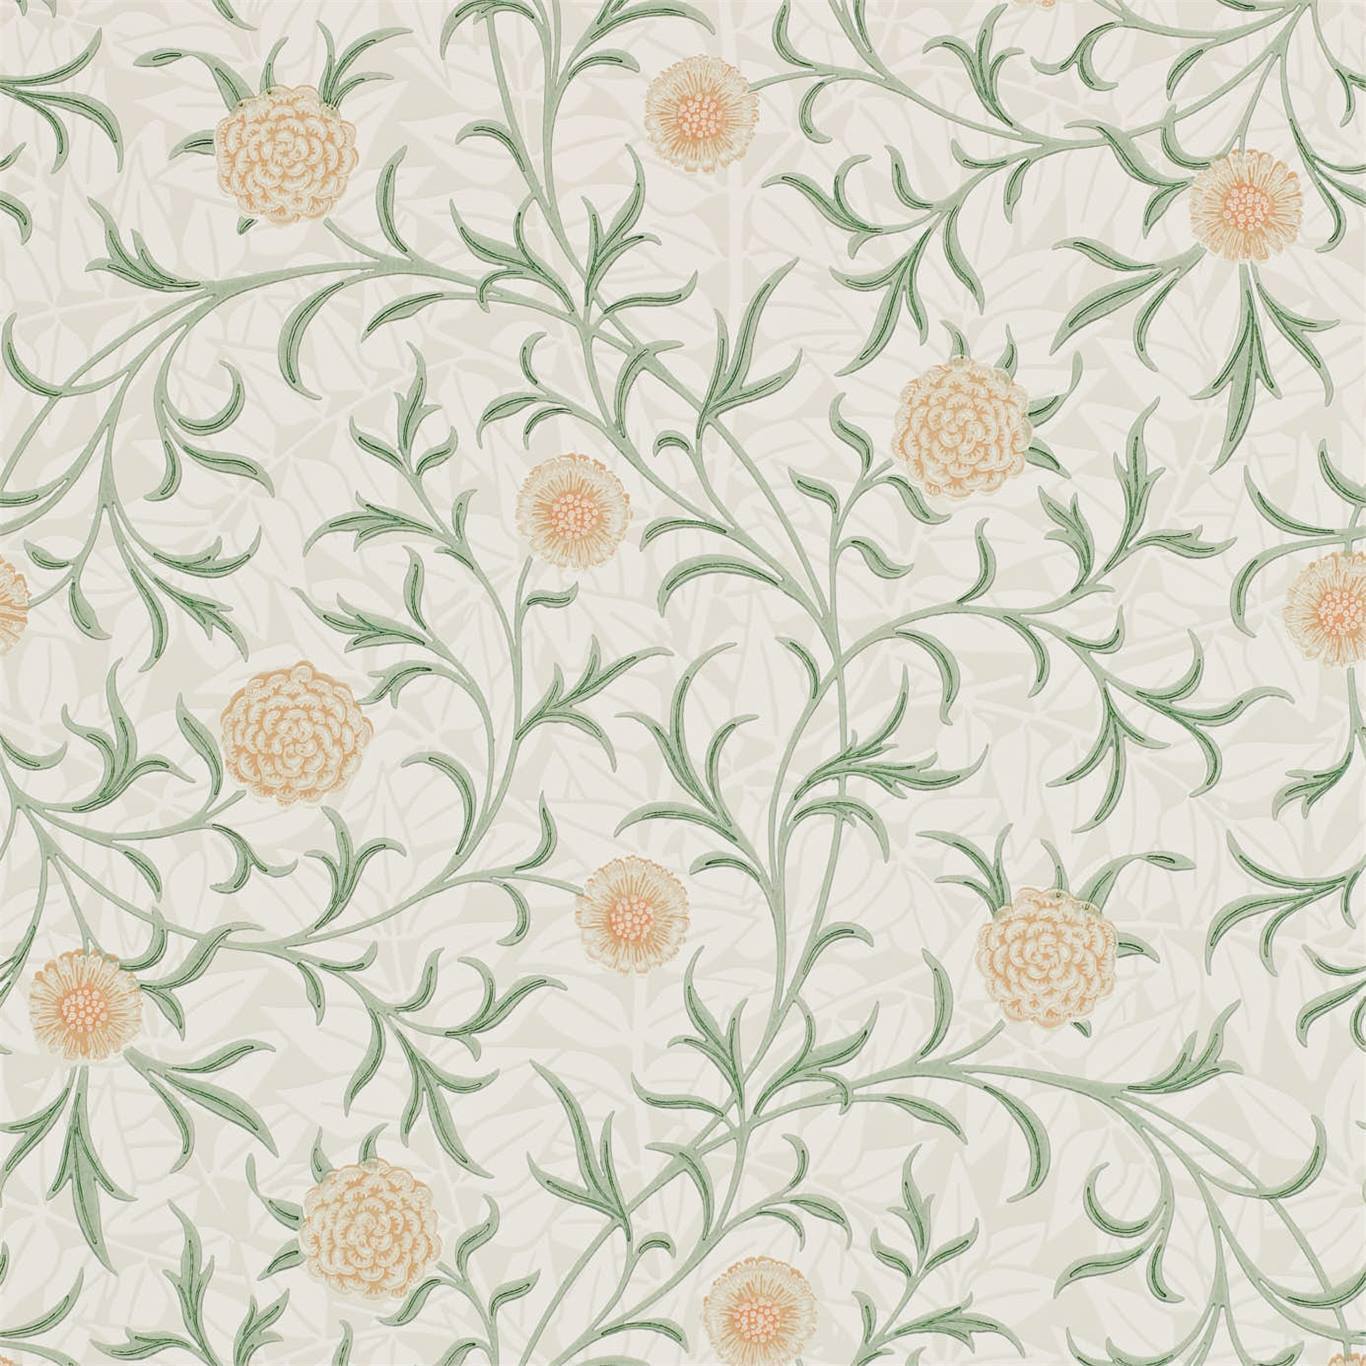 Scroll Thyme/Pear Wallpaper DCMW216831 by Morris & Co